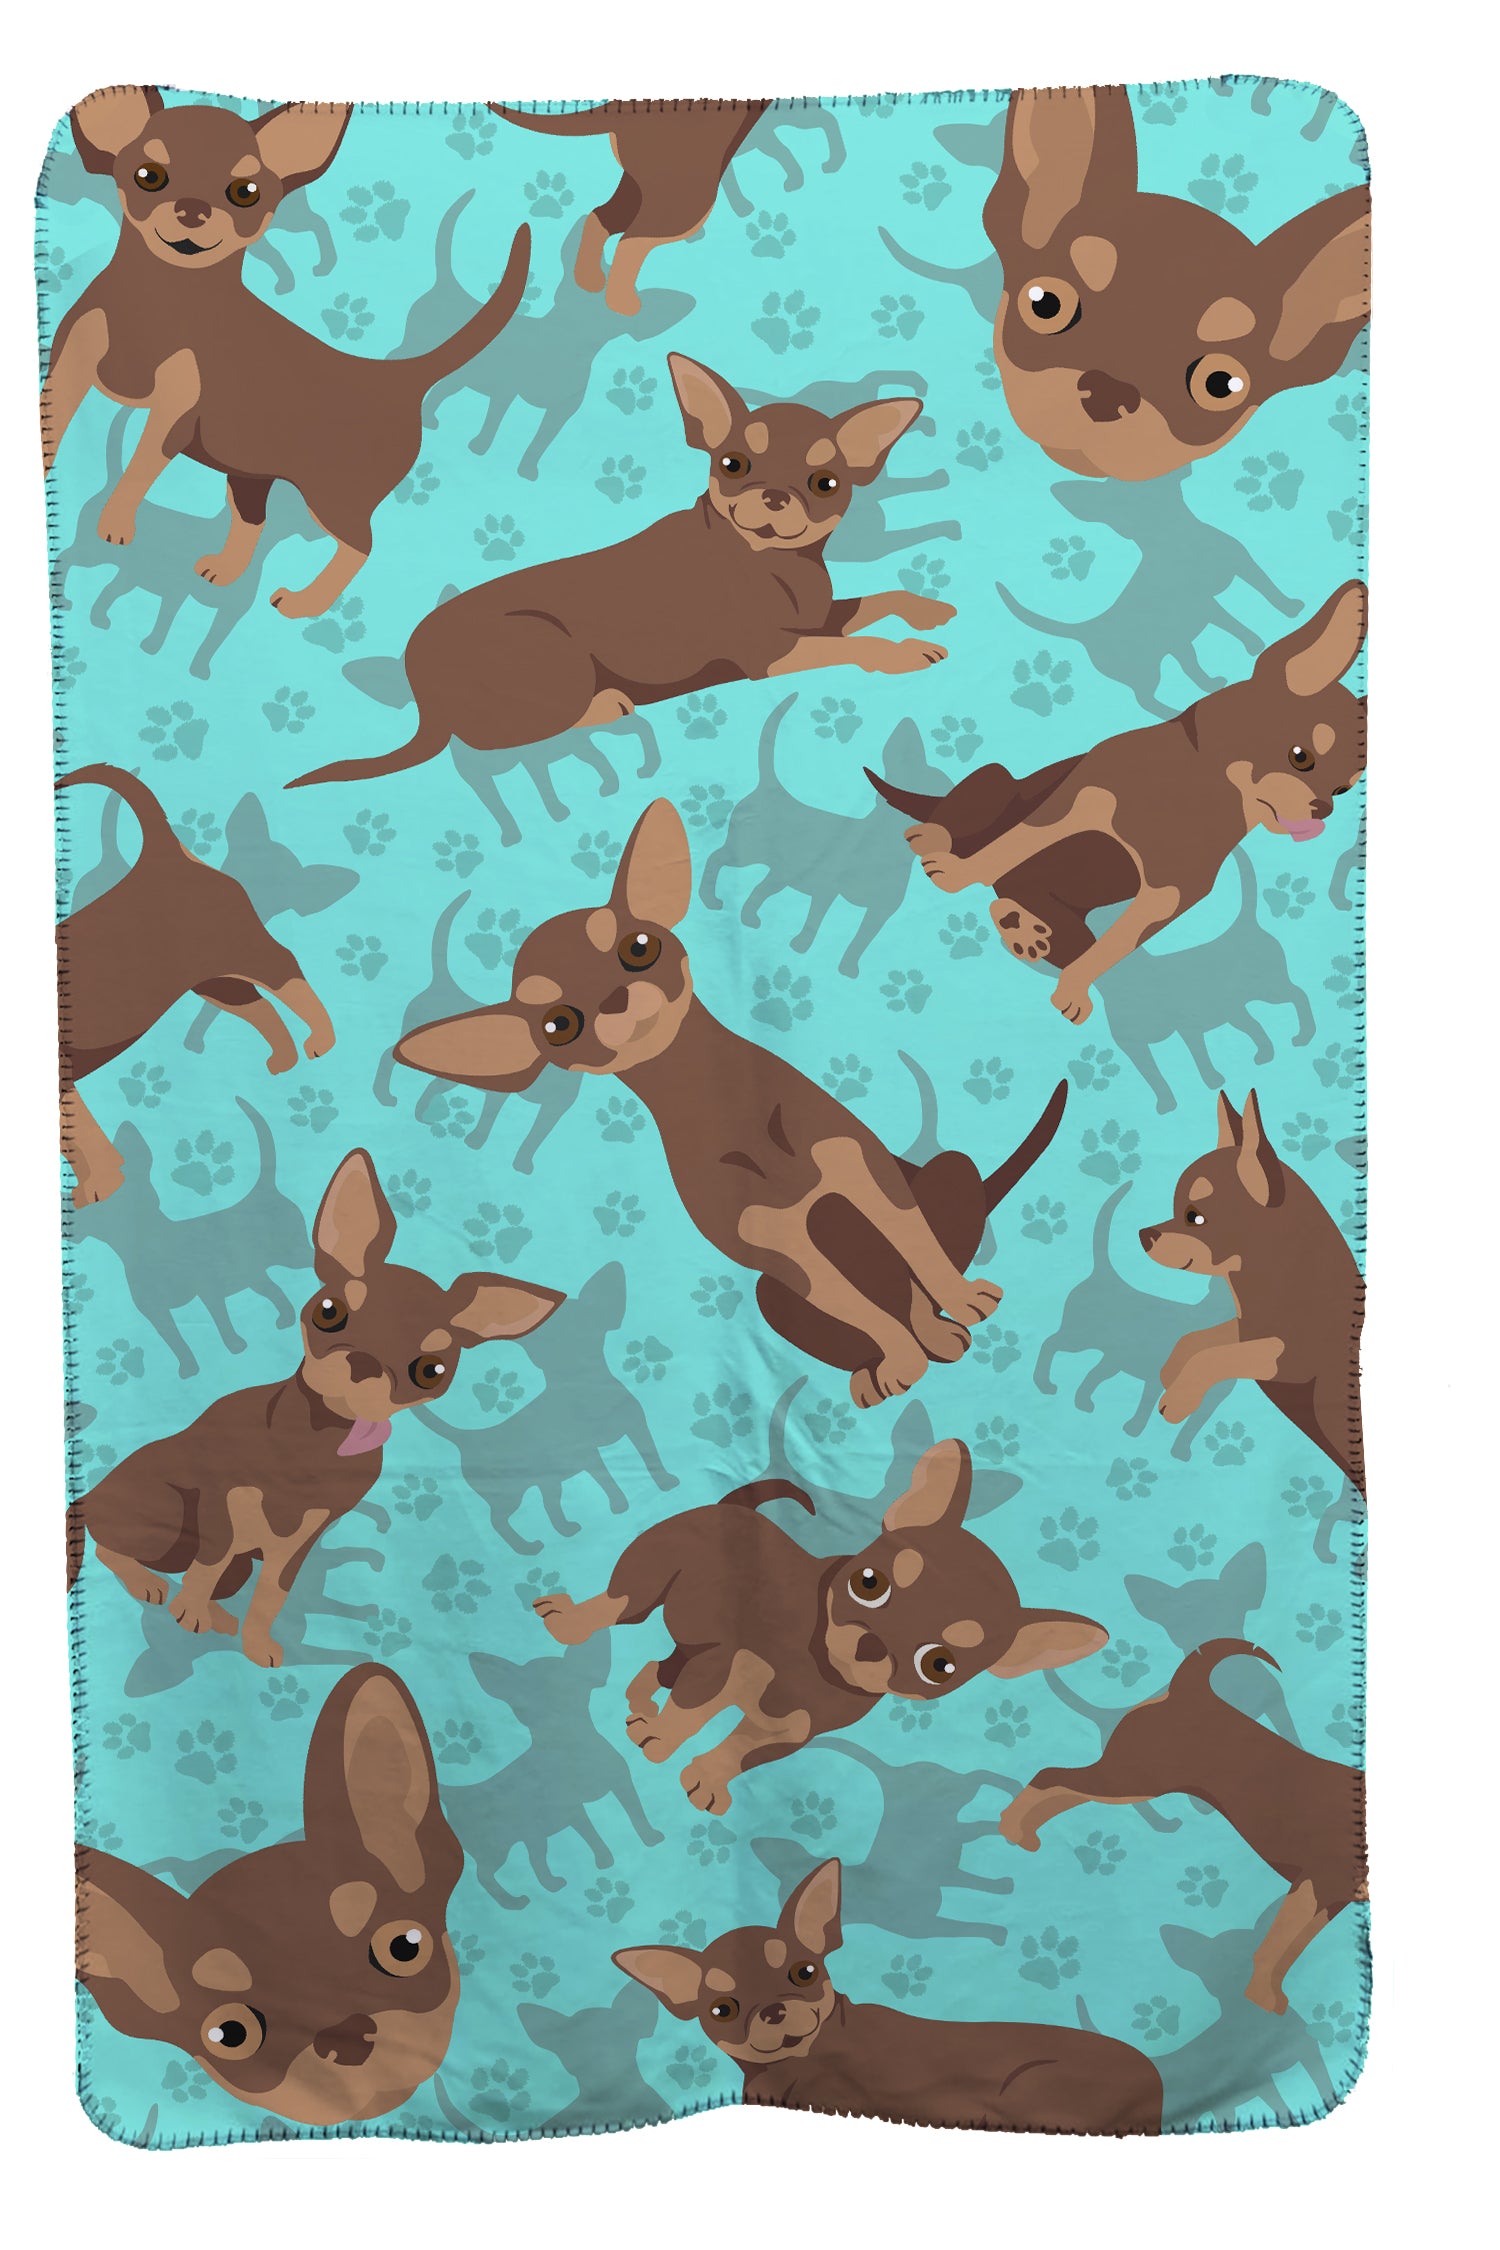 Buy this Chocolate Chihuahua Soft Travel Blanket with Bag